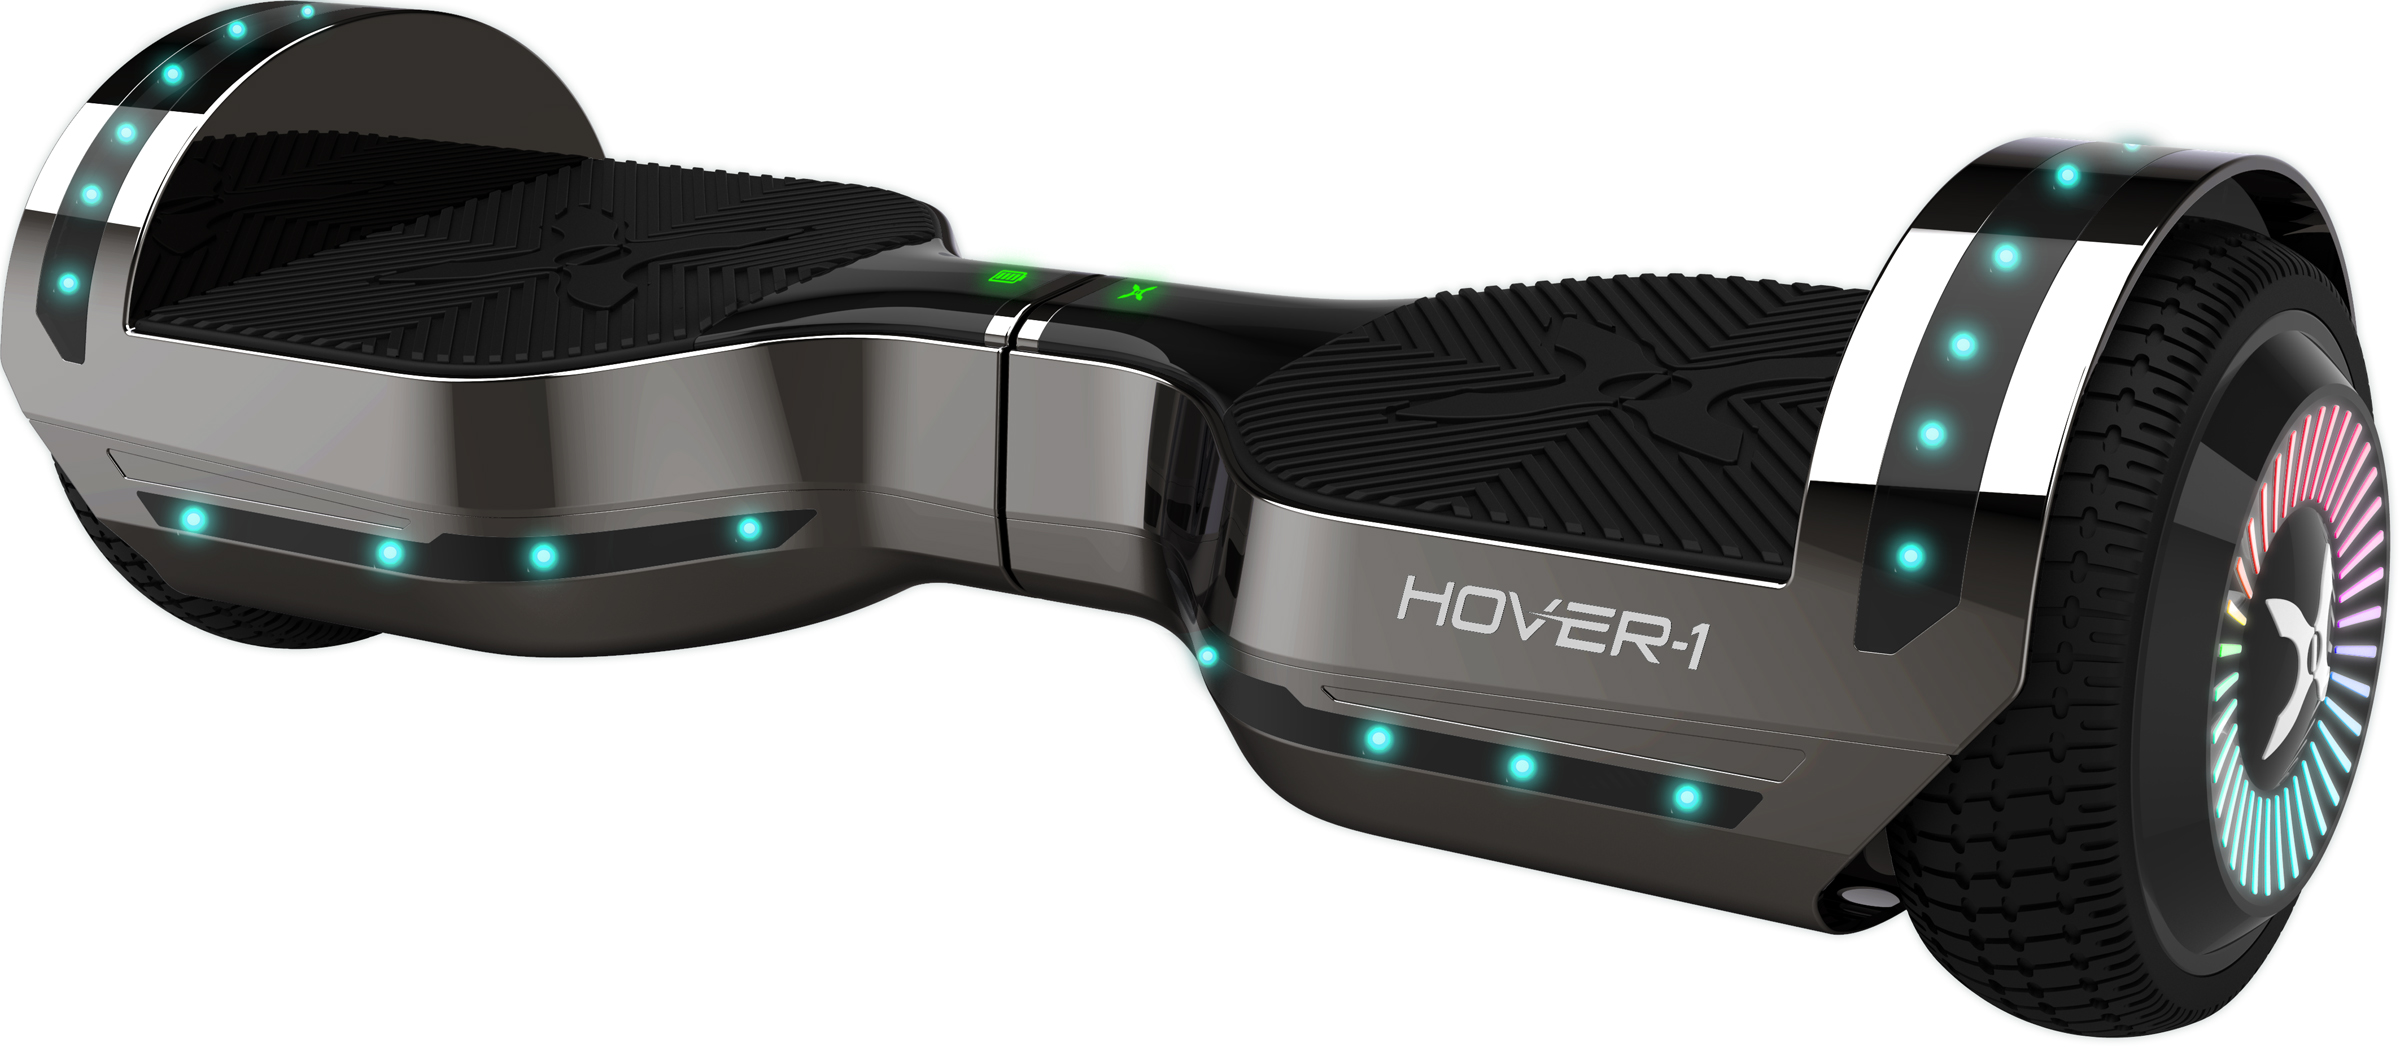 Hover-1 Chrome 7 Mph Hoverboard with LED Lights and Bluetooth Speaker, 6.5 In. Tires, 220 Lbs. Max Weight, Gunmetal - image 1 of 8